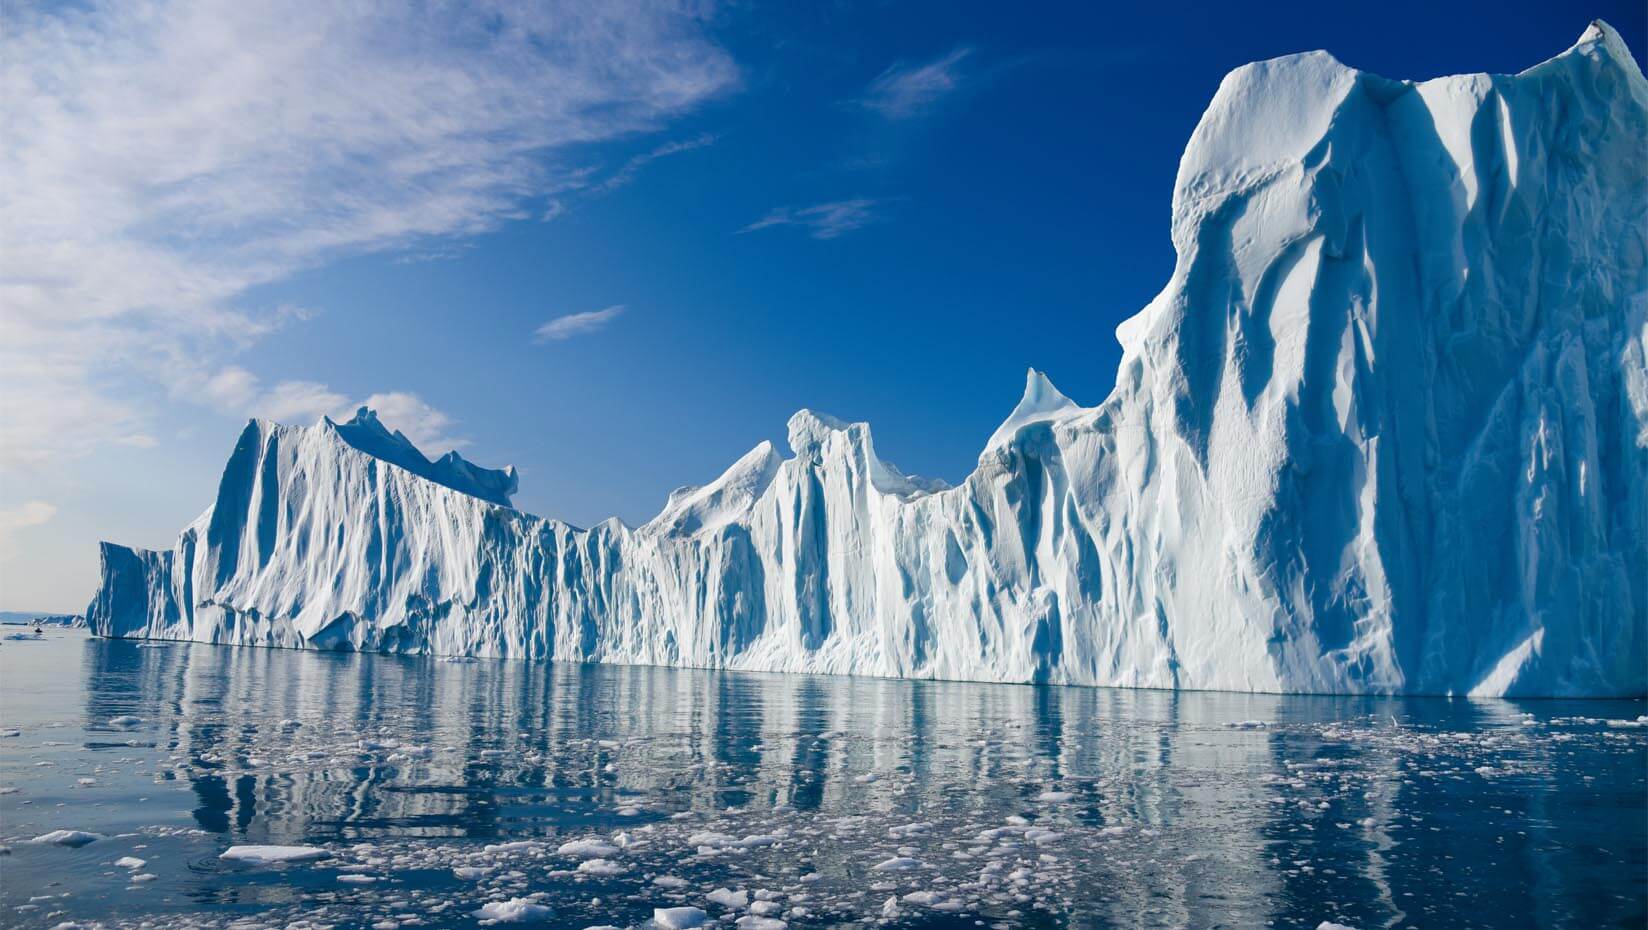 Researchers Use GPS-Tracked Icebergs in Novel Study to Improve Climate Models